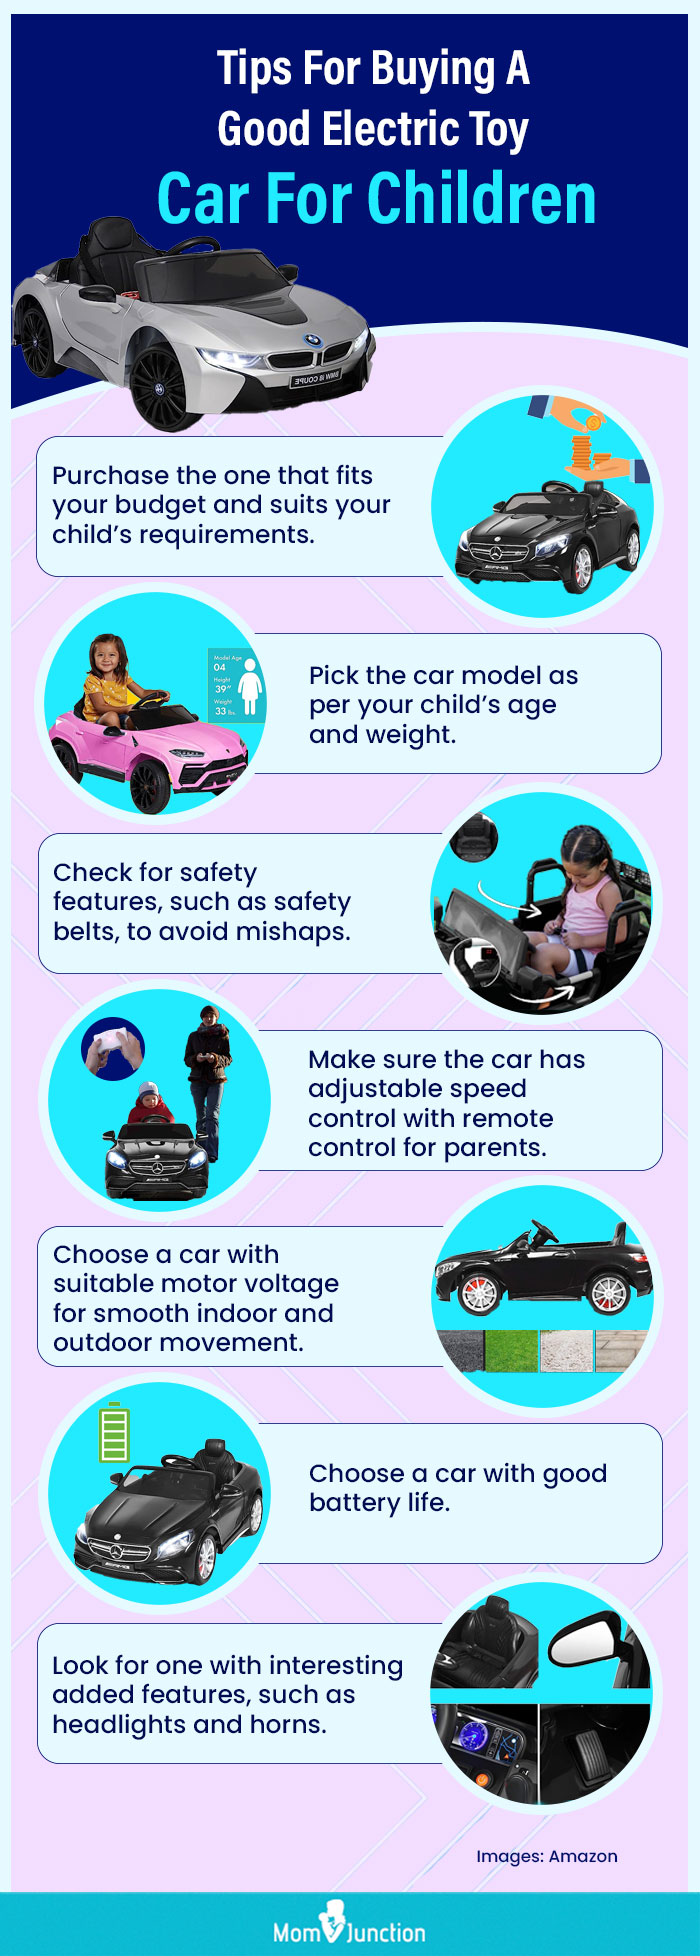 Tips For Buying A Good Electric Toy Car For Children(infographic)